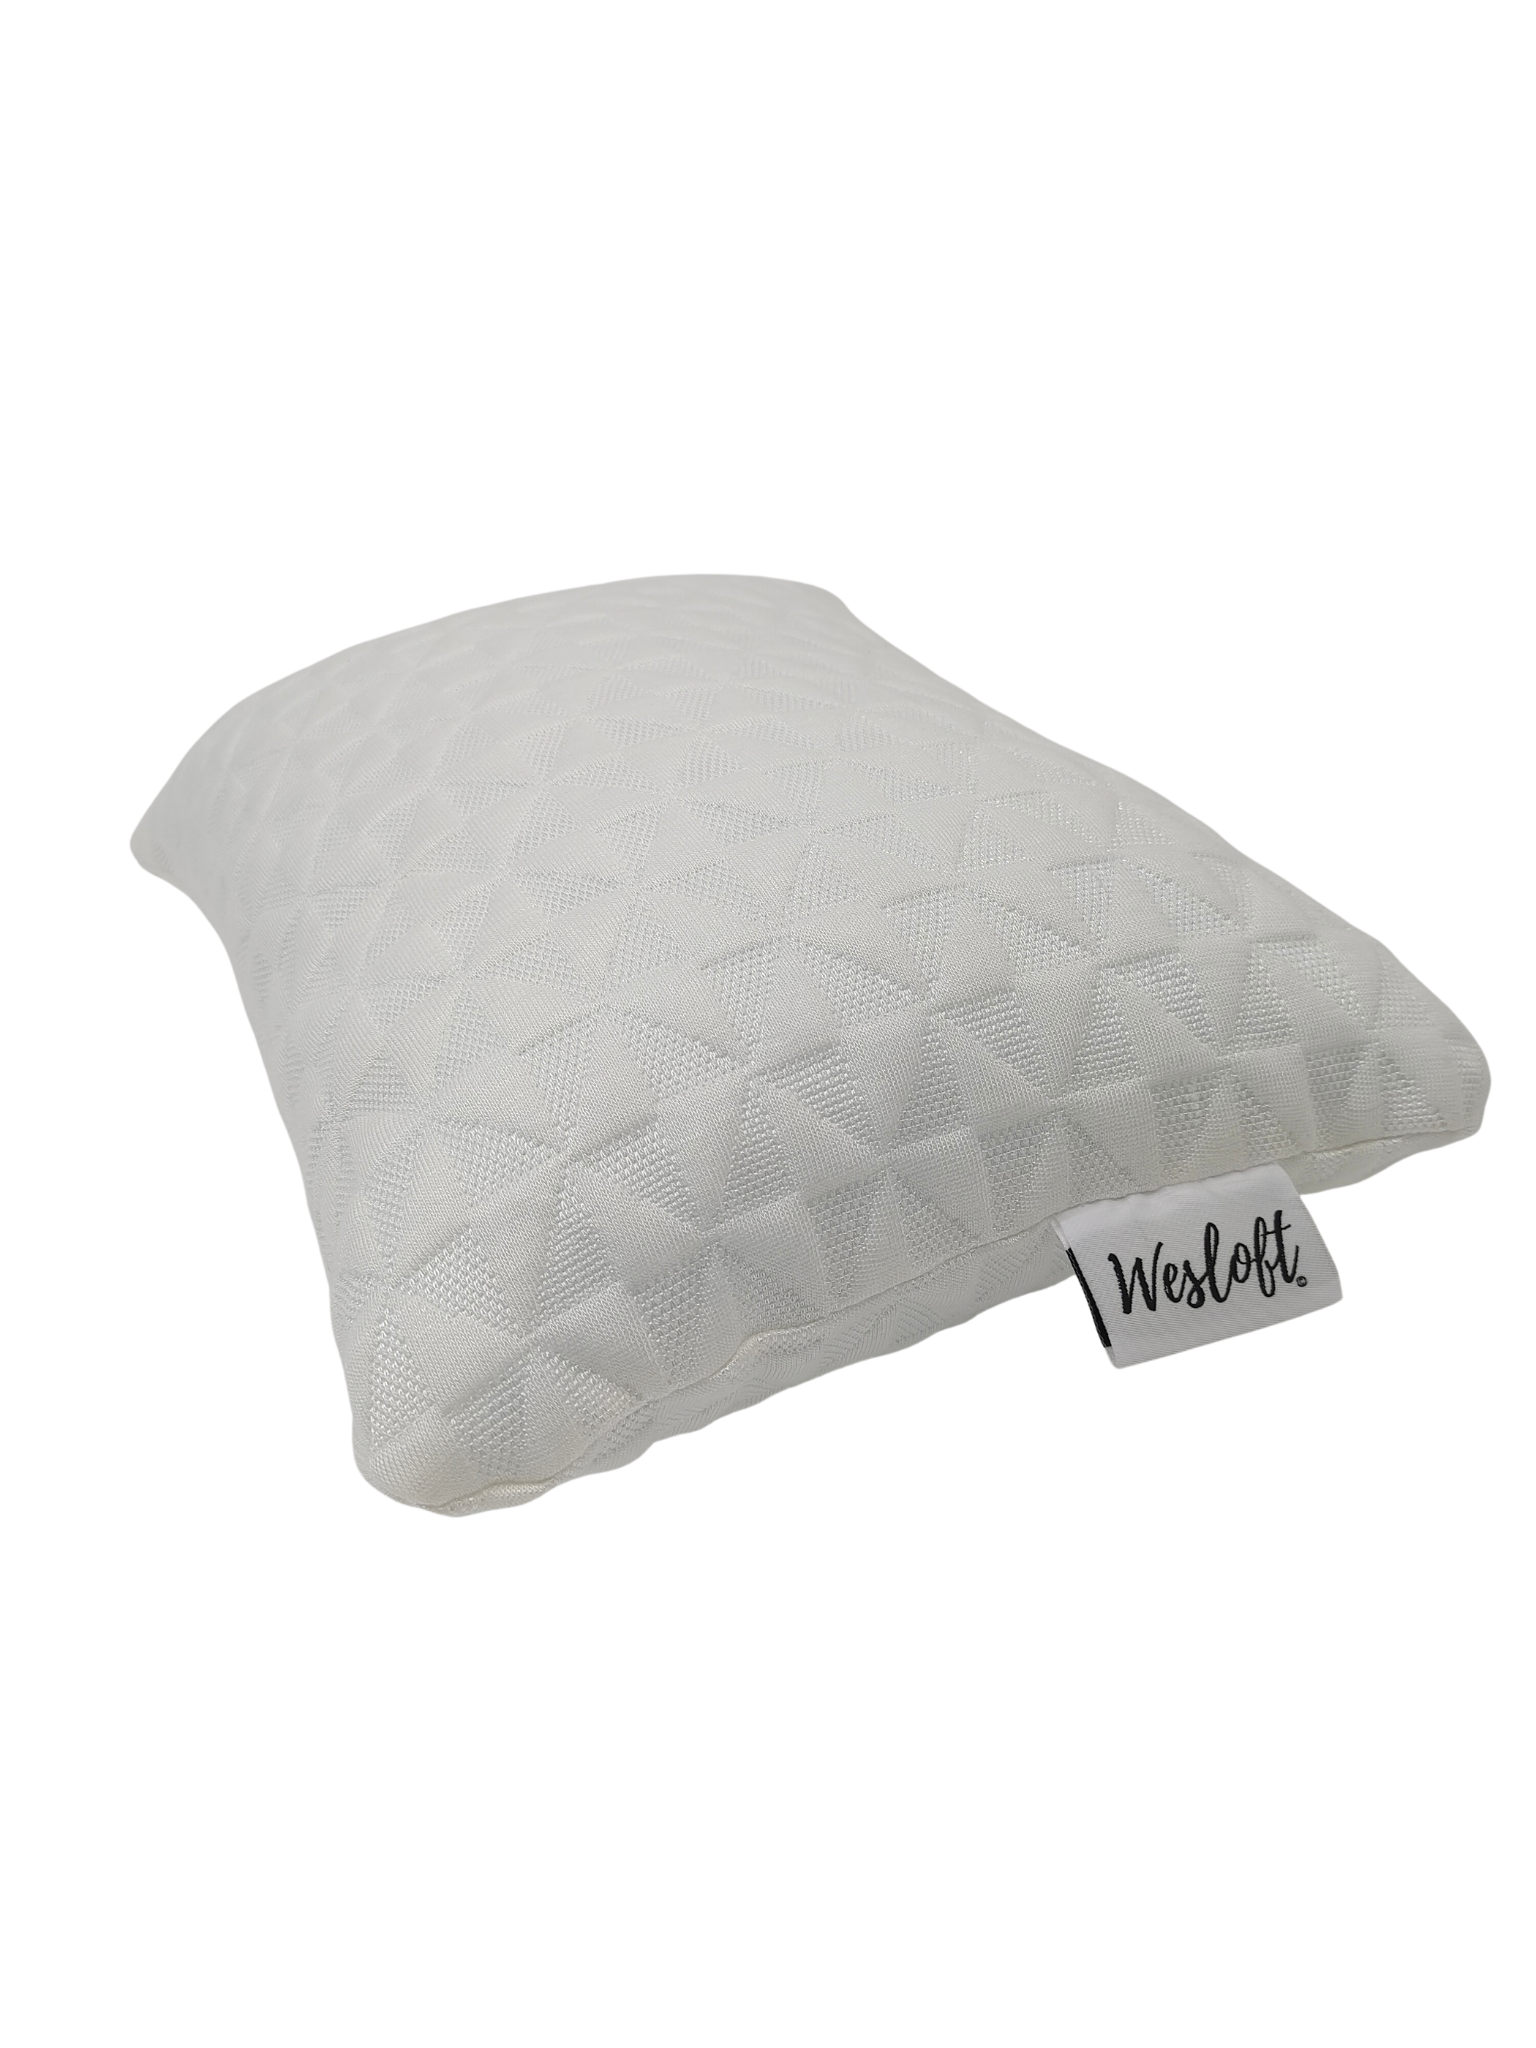 Sleeper Pillow - Cervical Pillow -Shoulder Pillow - Cooling Pillow - Memory  Foam Pillow - Bamboo Pillow Cover Orthopedic Pillow Supports Natural Posture  and Neutral Neck Position 